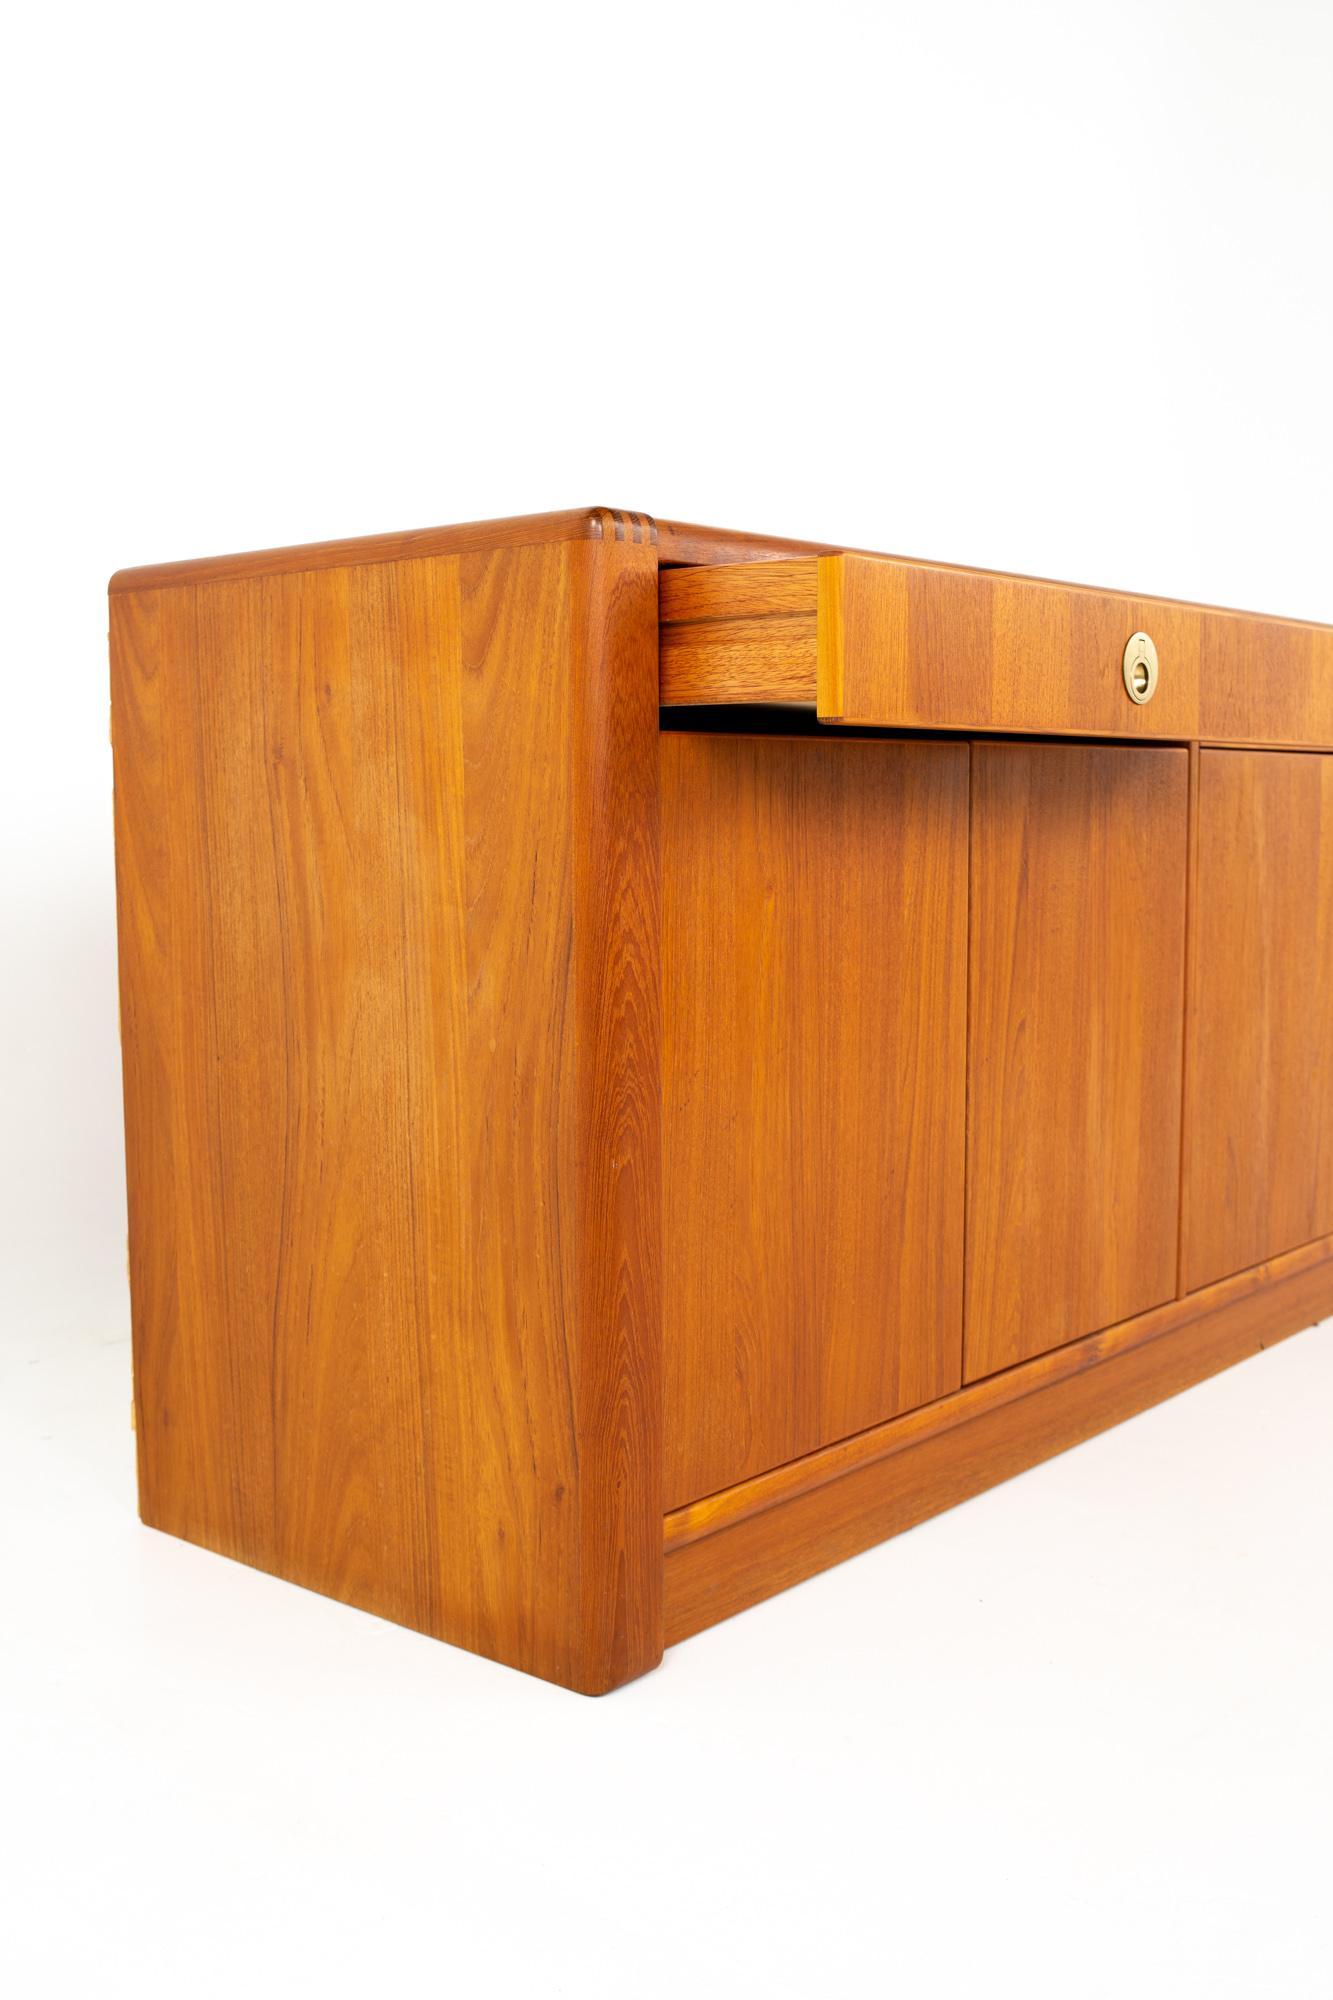 American Mid Century Teak and Brass Sideboard Buffet Credenza